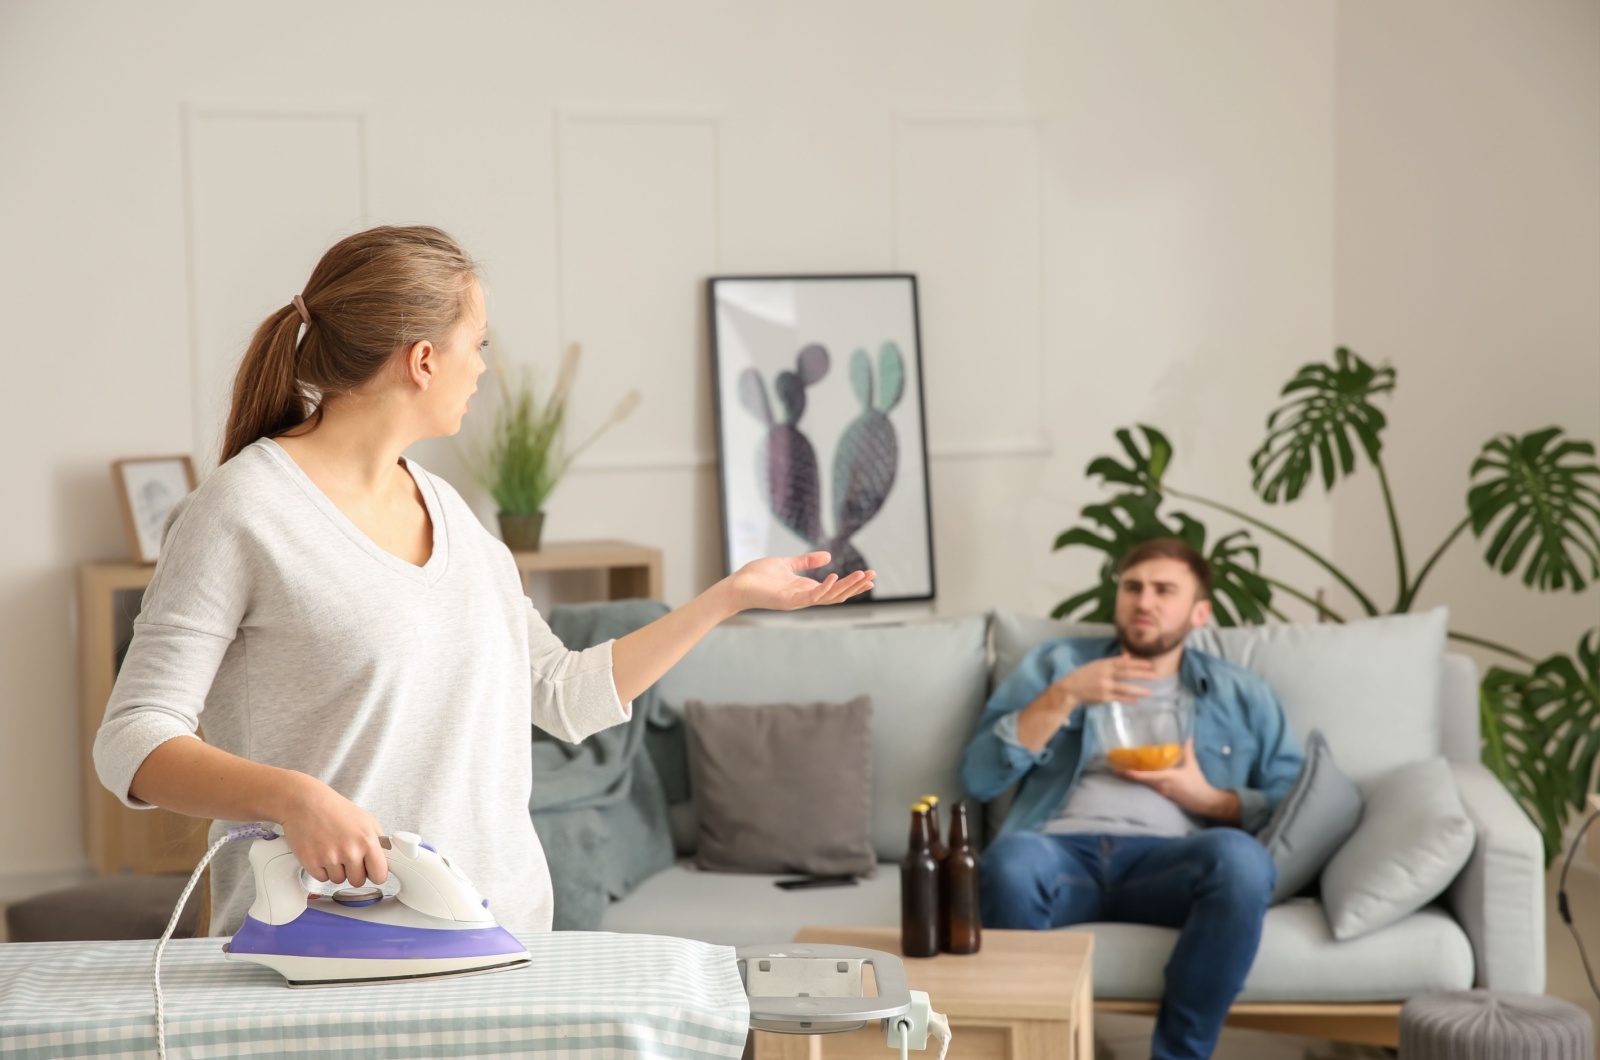 woman ironing while man sits on couch